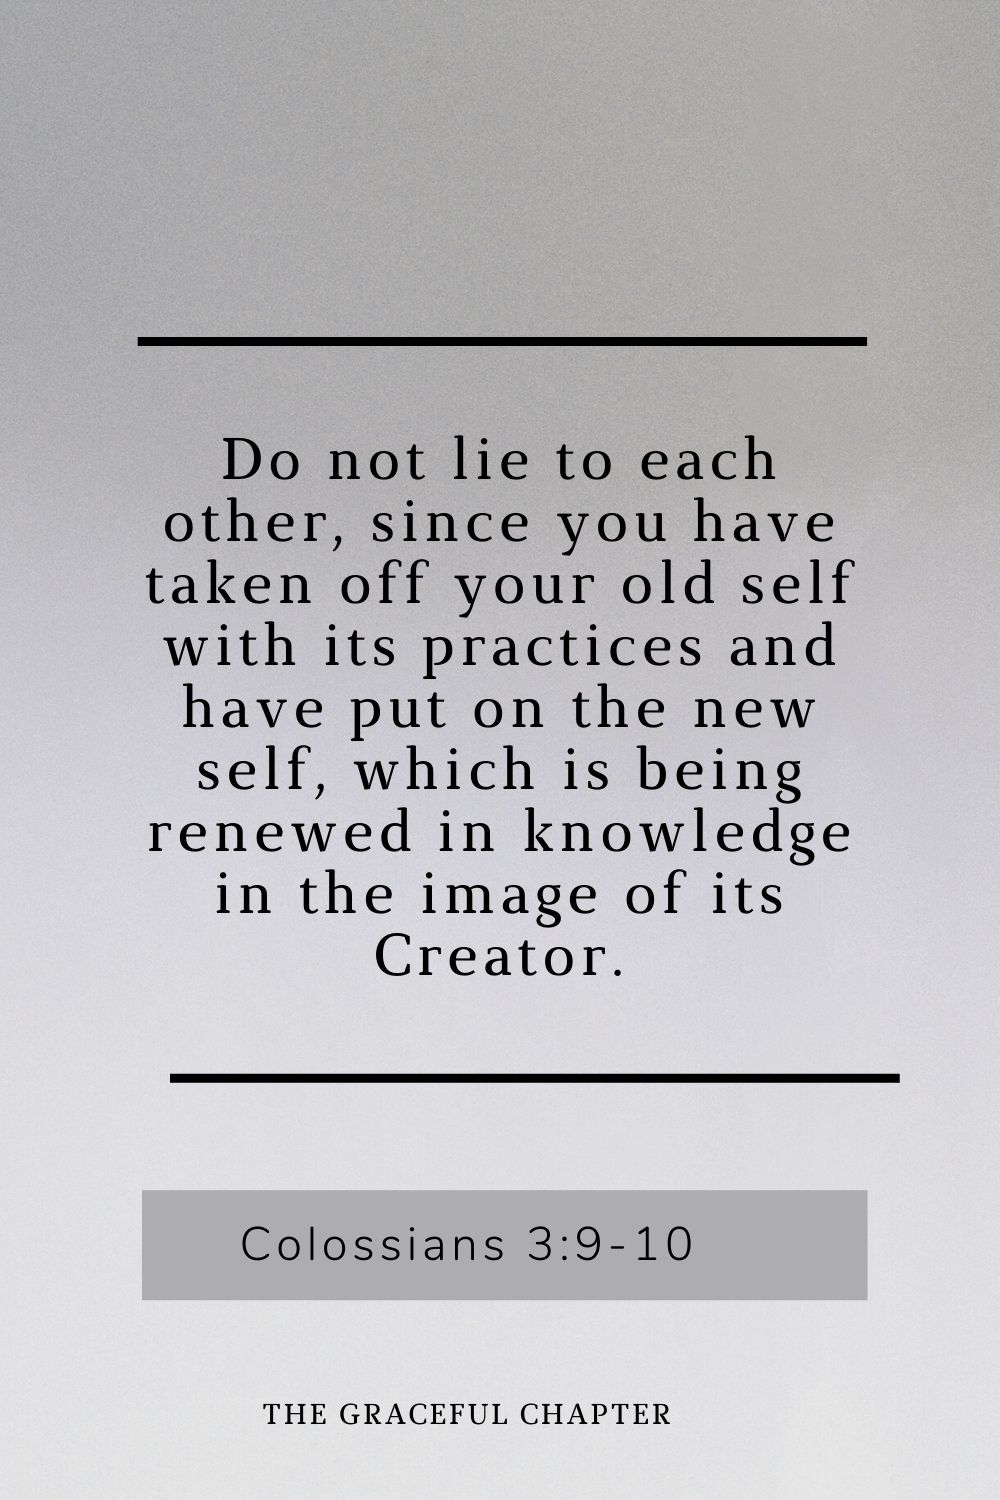 Do not lie to each other, since you have taken off your old self with its practices and have put on the new self, which is being renewed in knowledge in the image of its Creator. Colossians 3:9-10